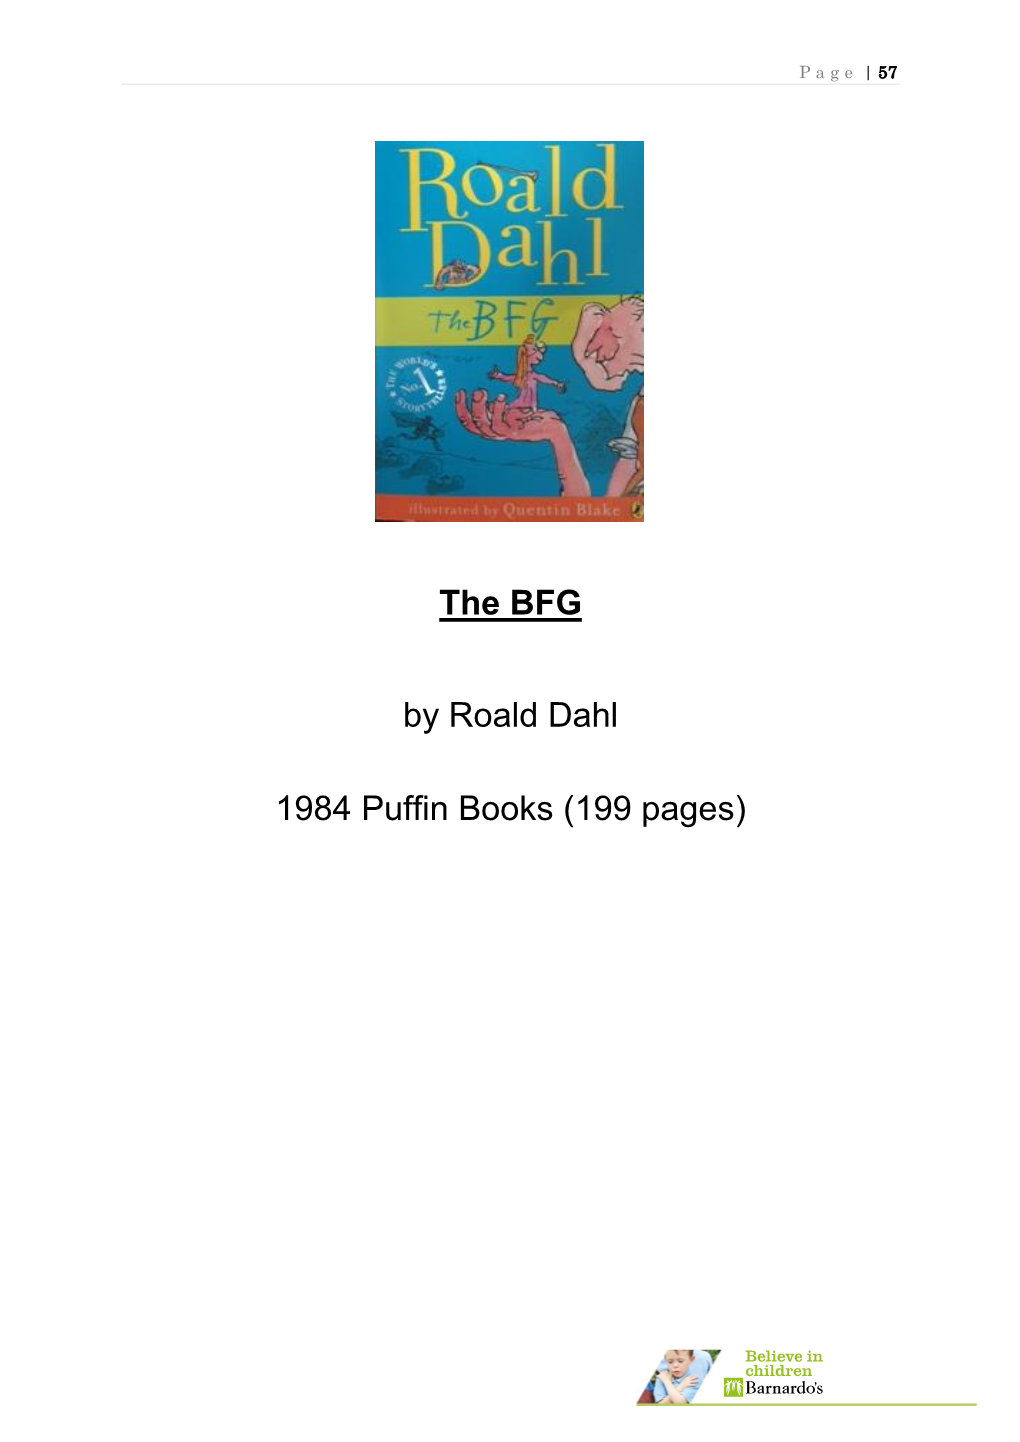 The BFG by Roald Dahl 1984 Puffin Books (199 Pages)